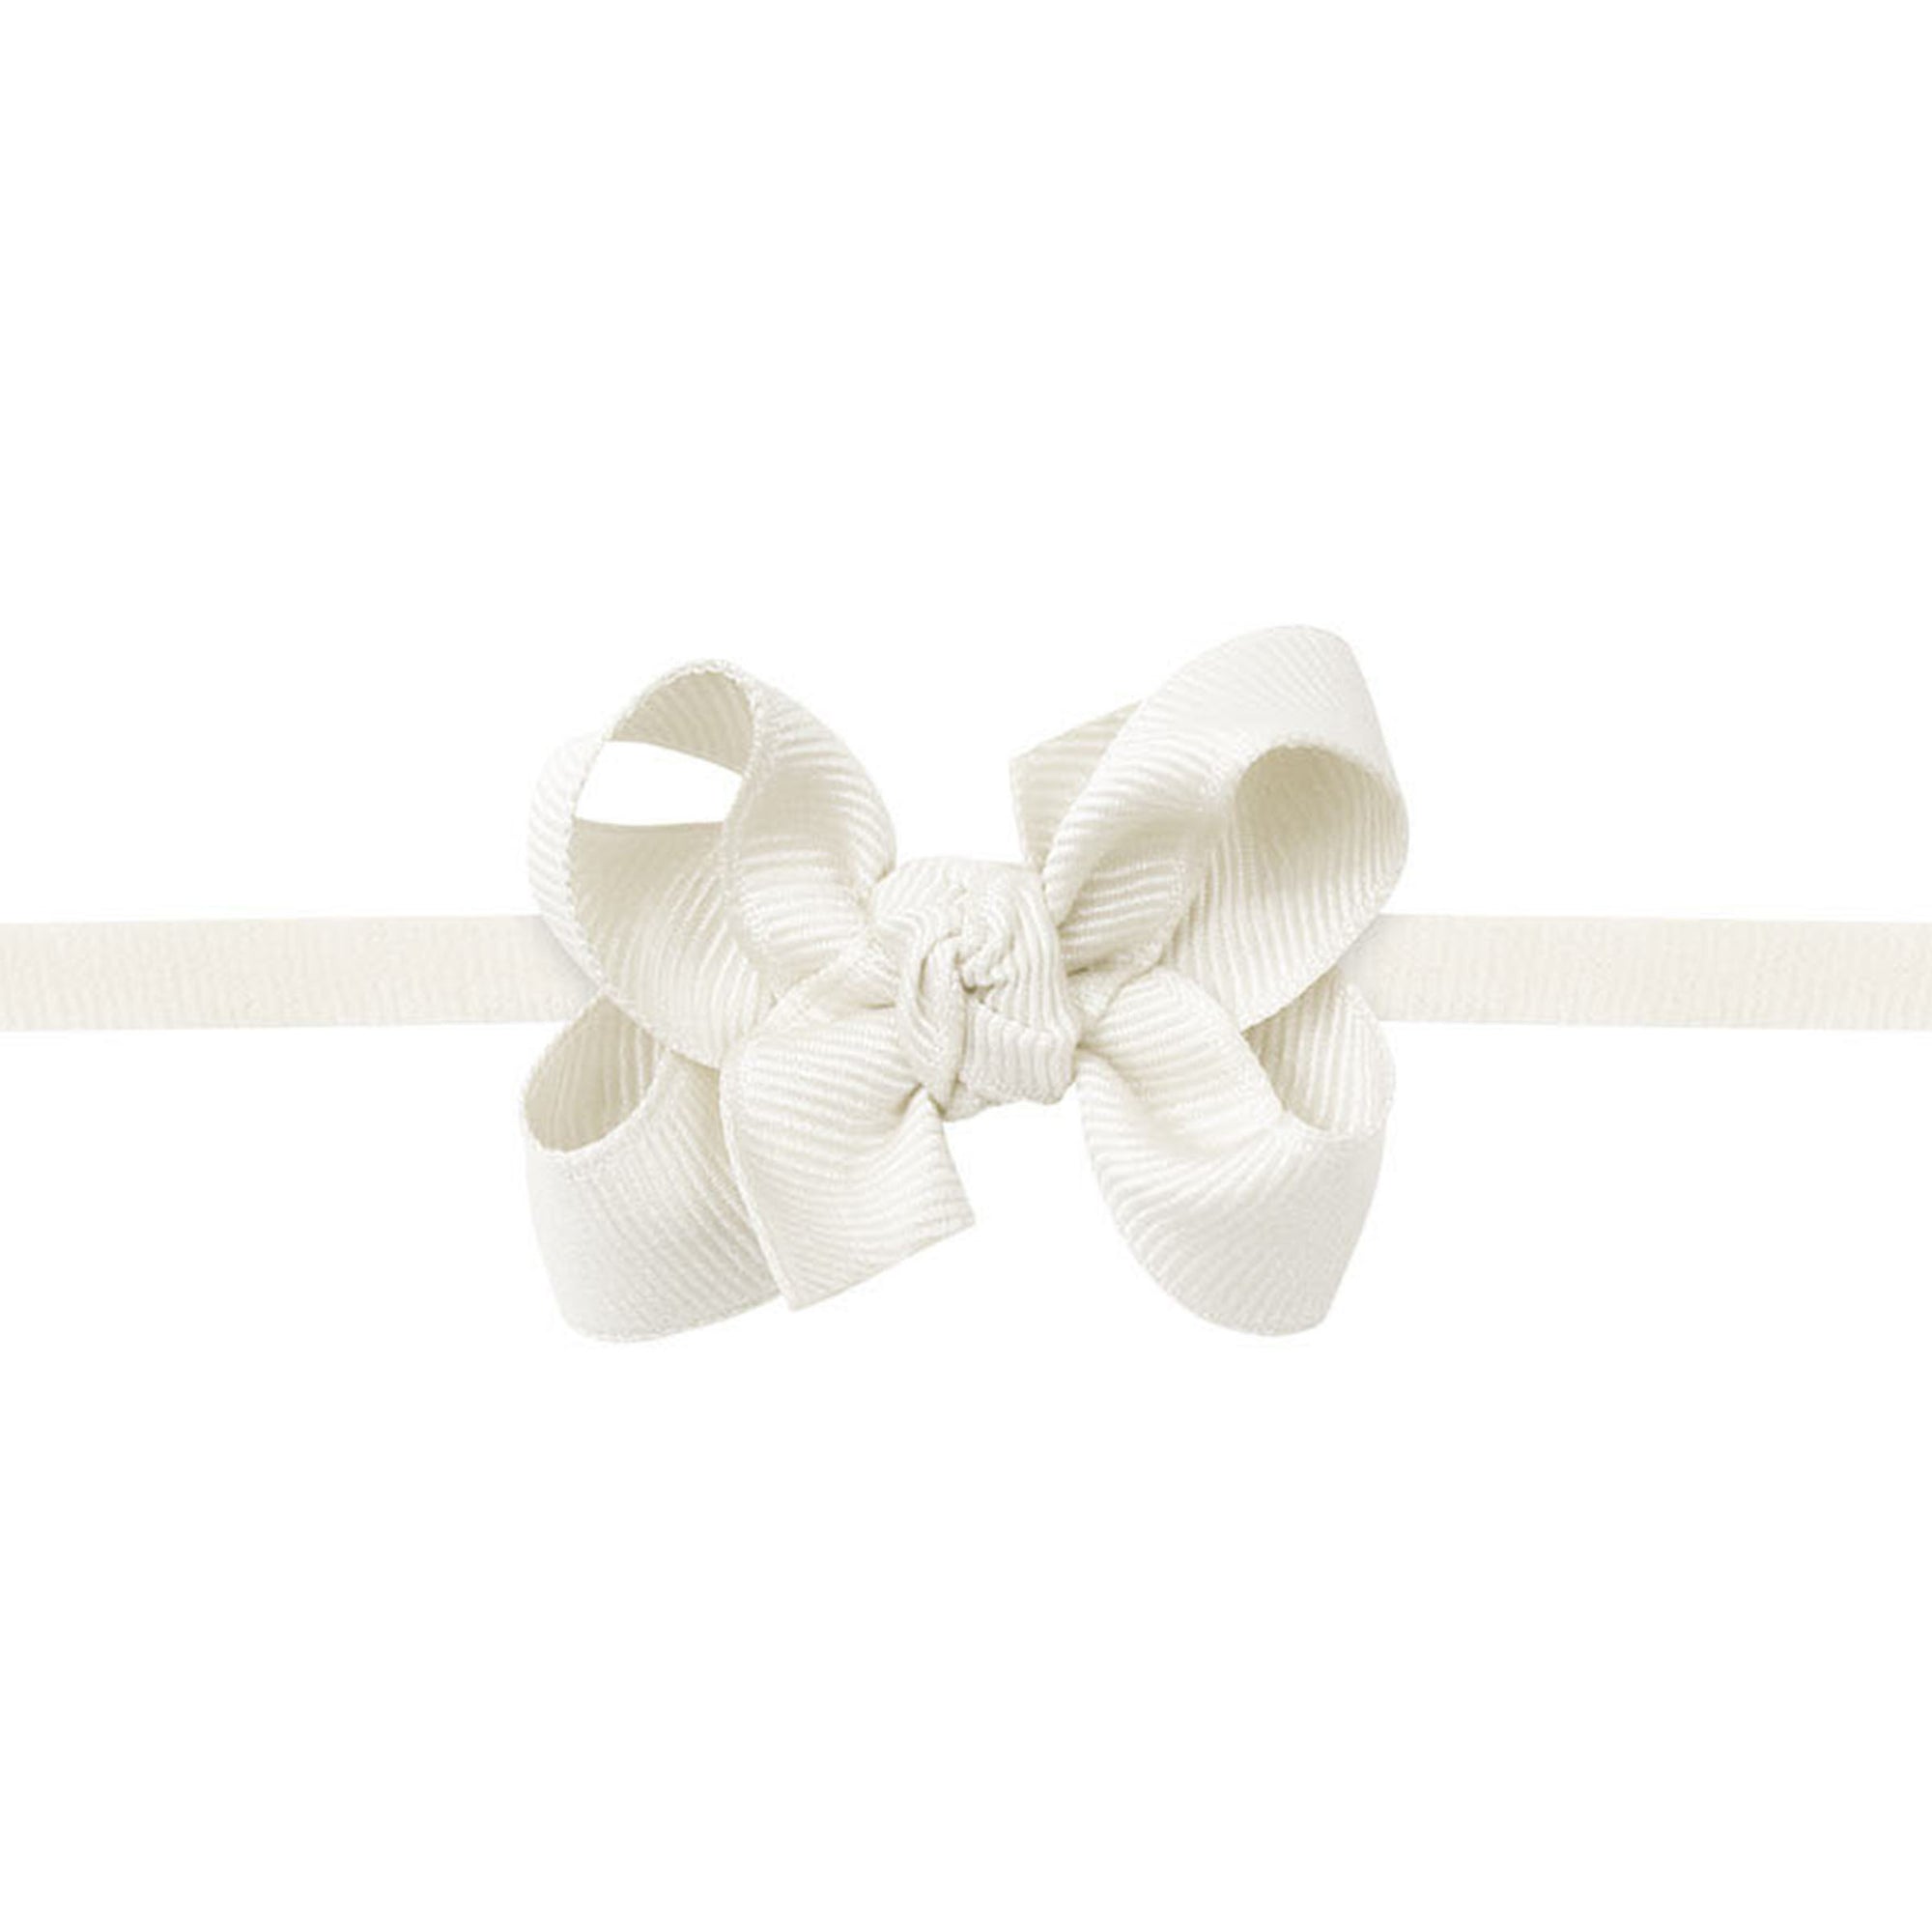 Beyond Creations Ivory Baby Headband with Bow